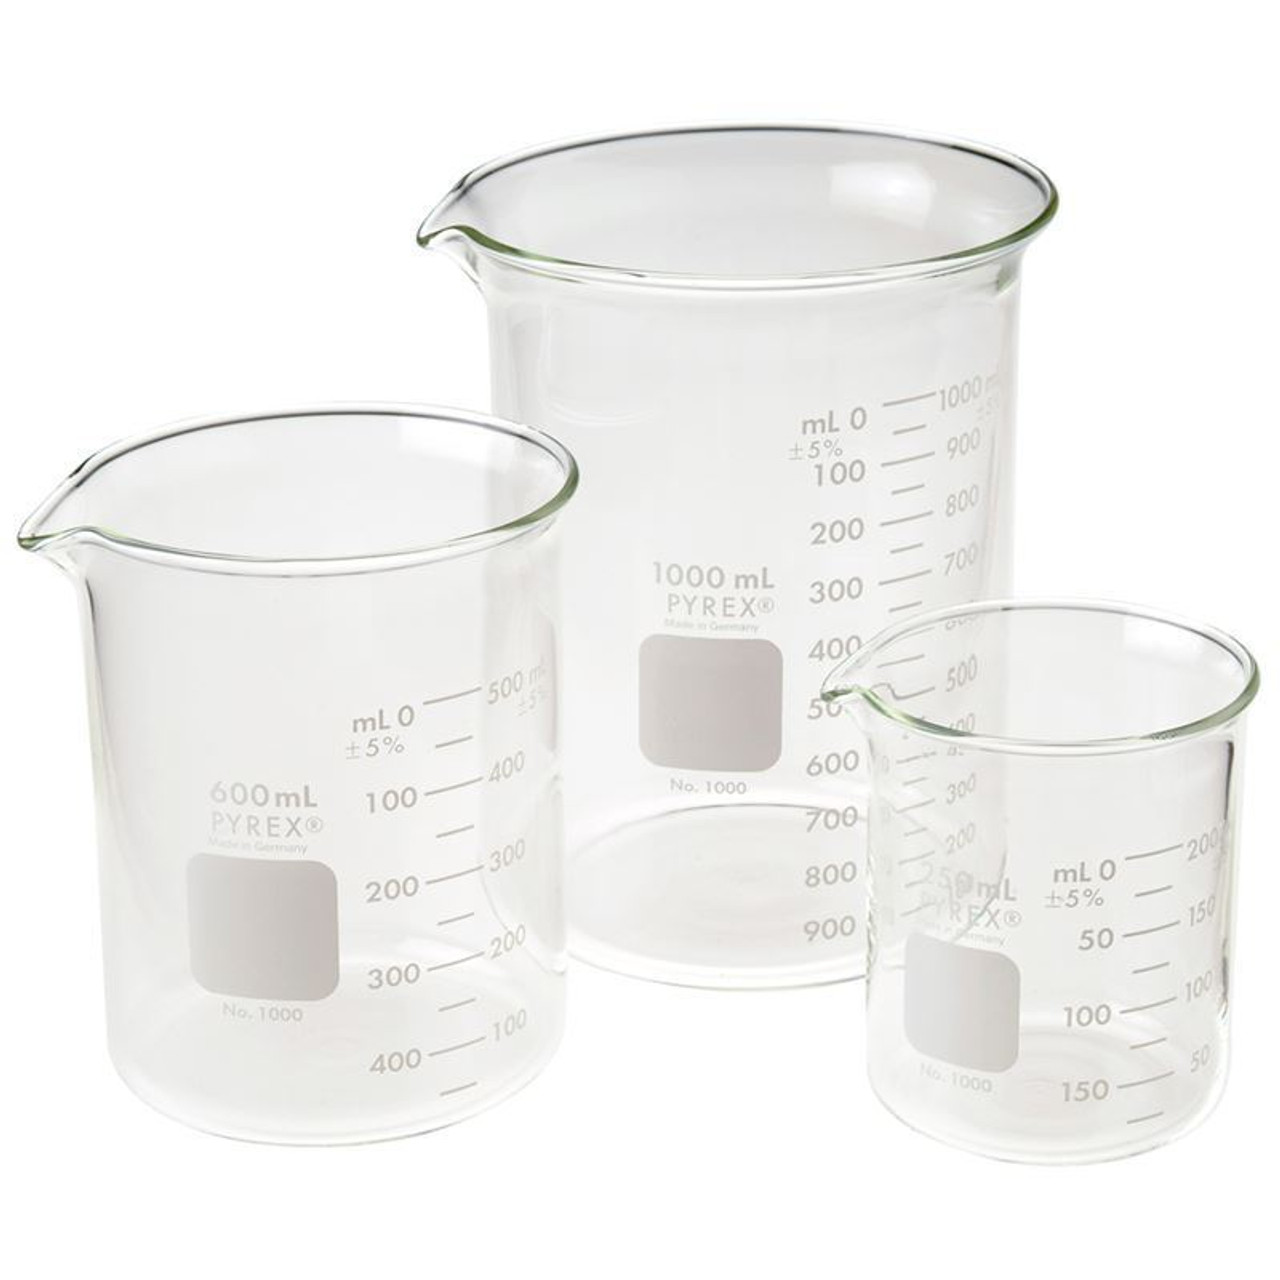 https://cdn11.bigcommerce.com/s-3yvzqa/images/stencil/1280x1280/products/1705/342712/0002947_beakers-griffin-low-form-double-scale-graduated-pyrex__75725.1693250094.jpg?c=2